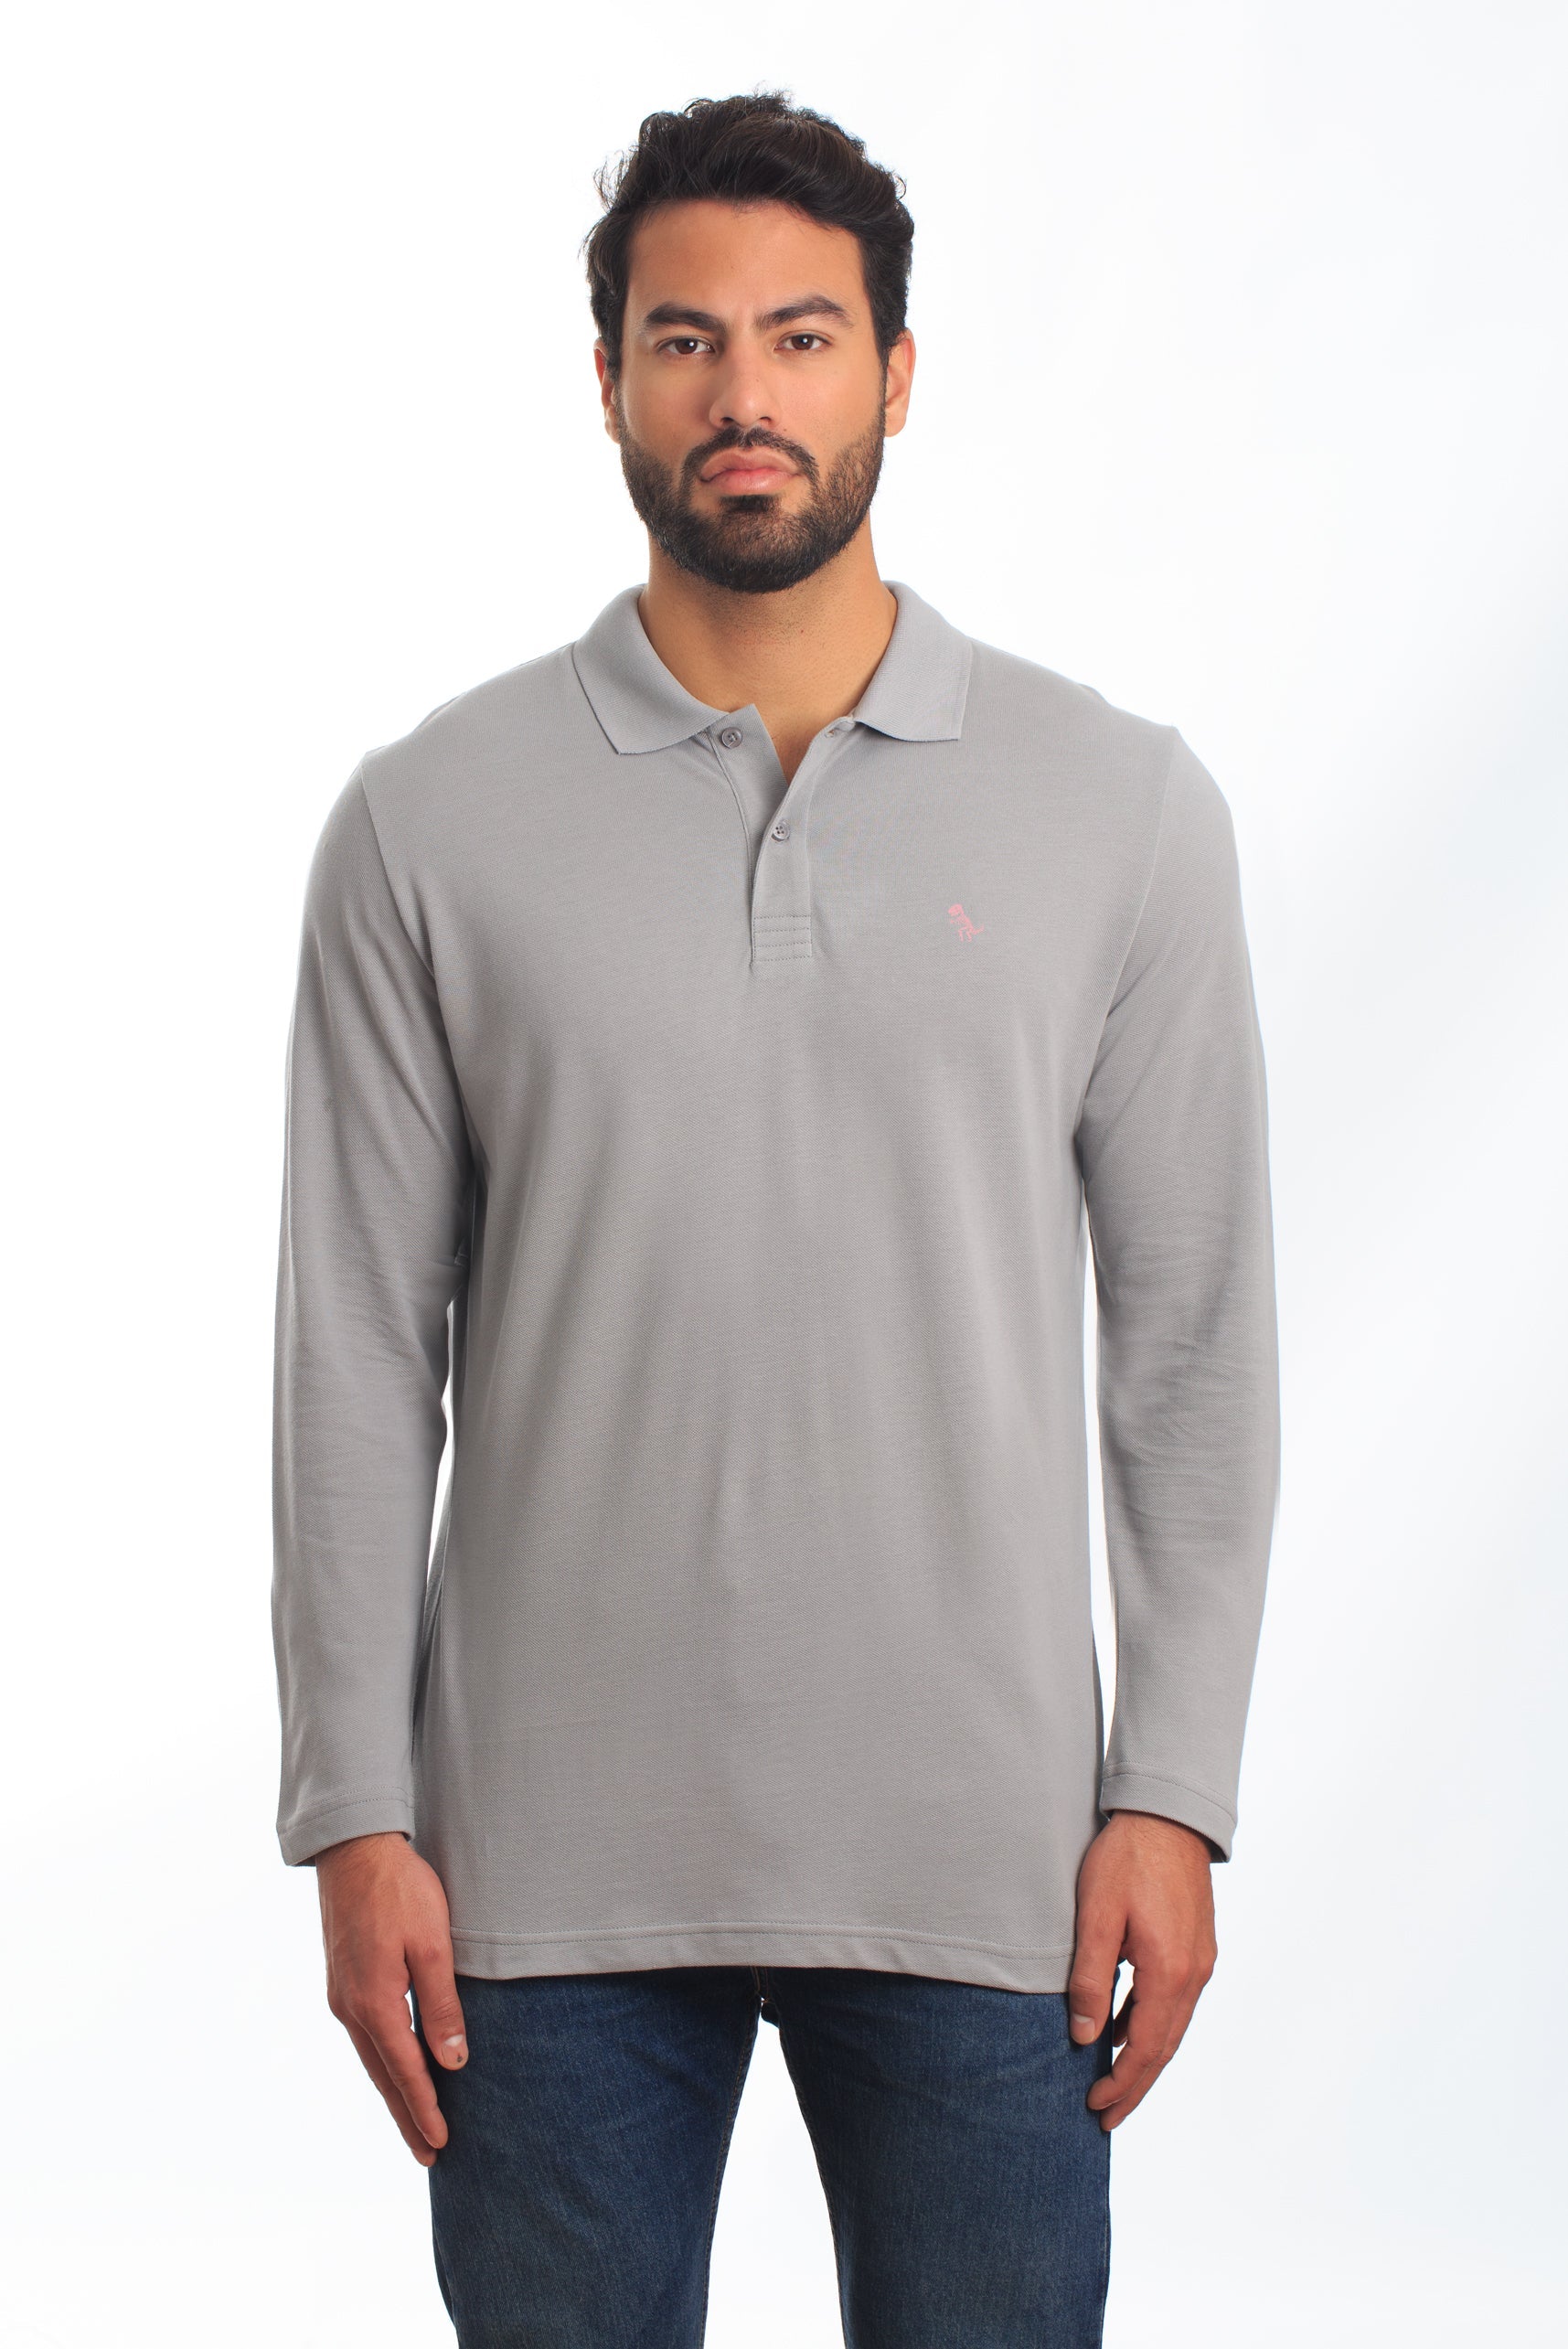 Grey Long Sleeve Polo PL-102 Front